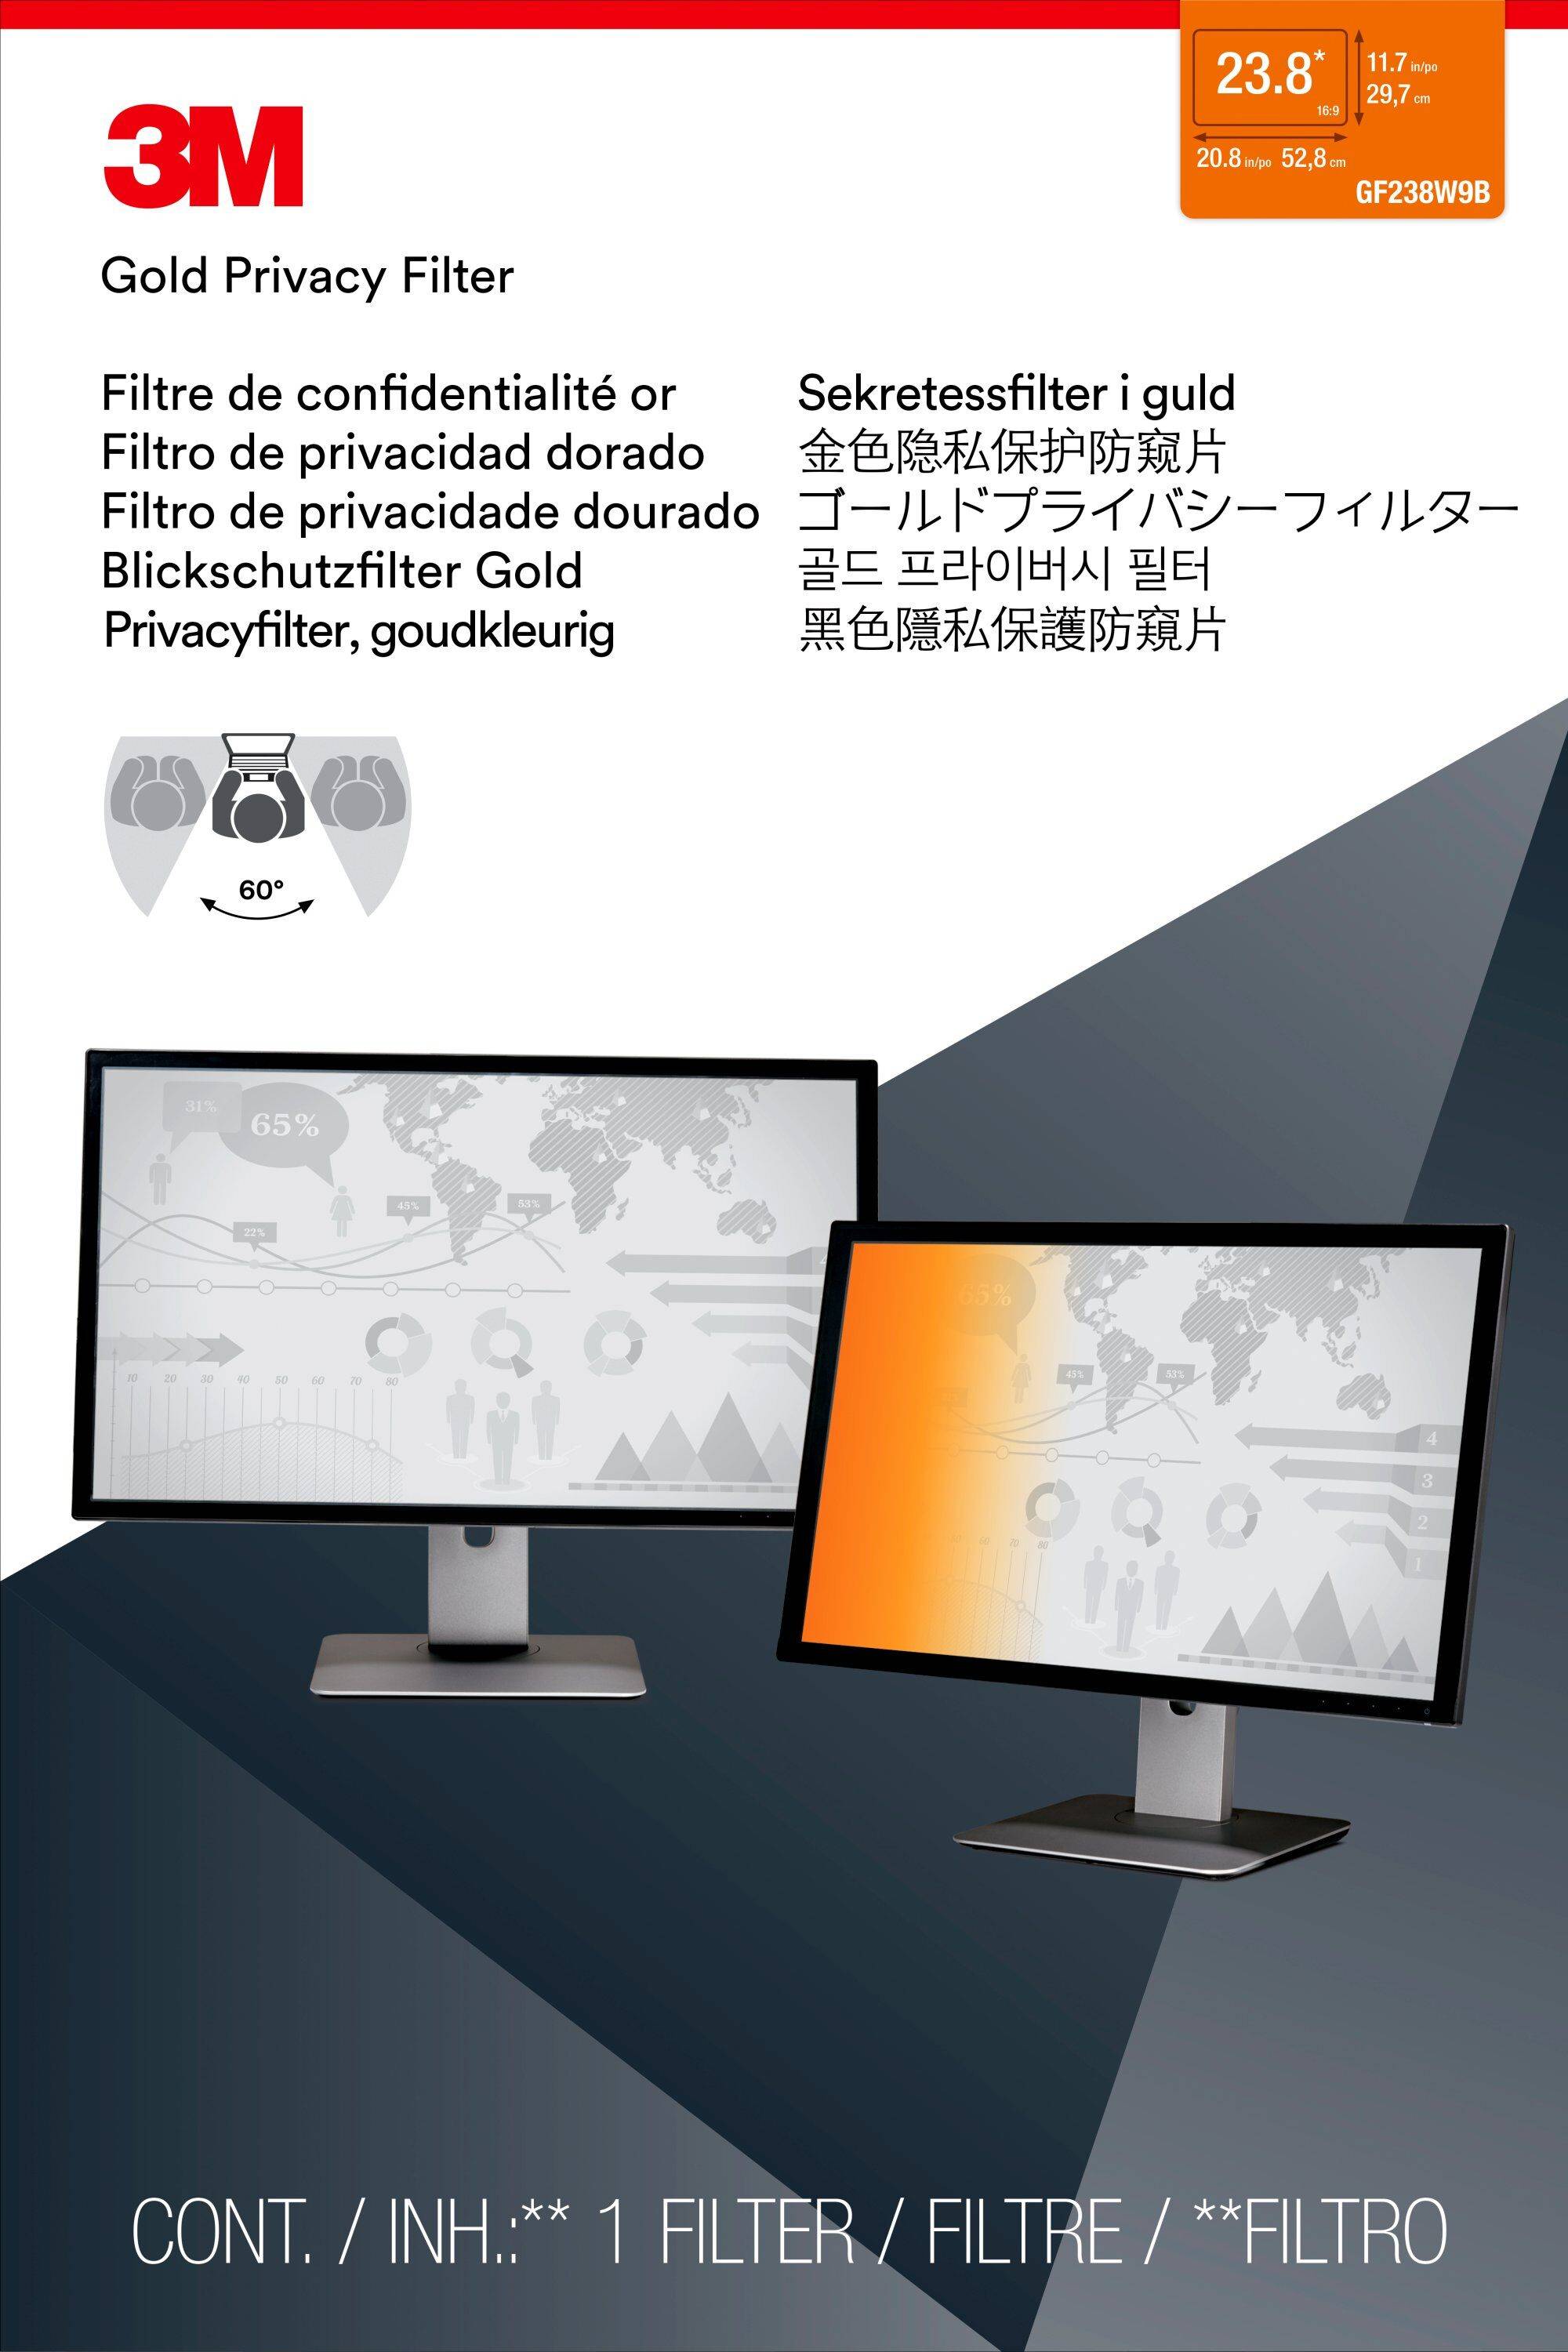 Rca Informatique - image du produit : GOLD PRIVACY FILTER FOR 23.8IN WIDESCREEN MONITOR